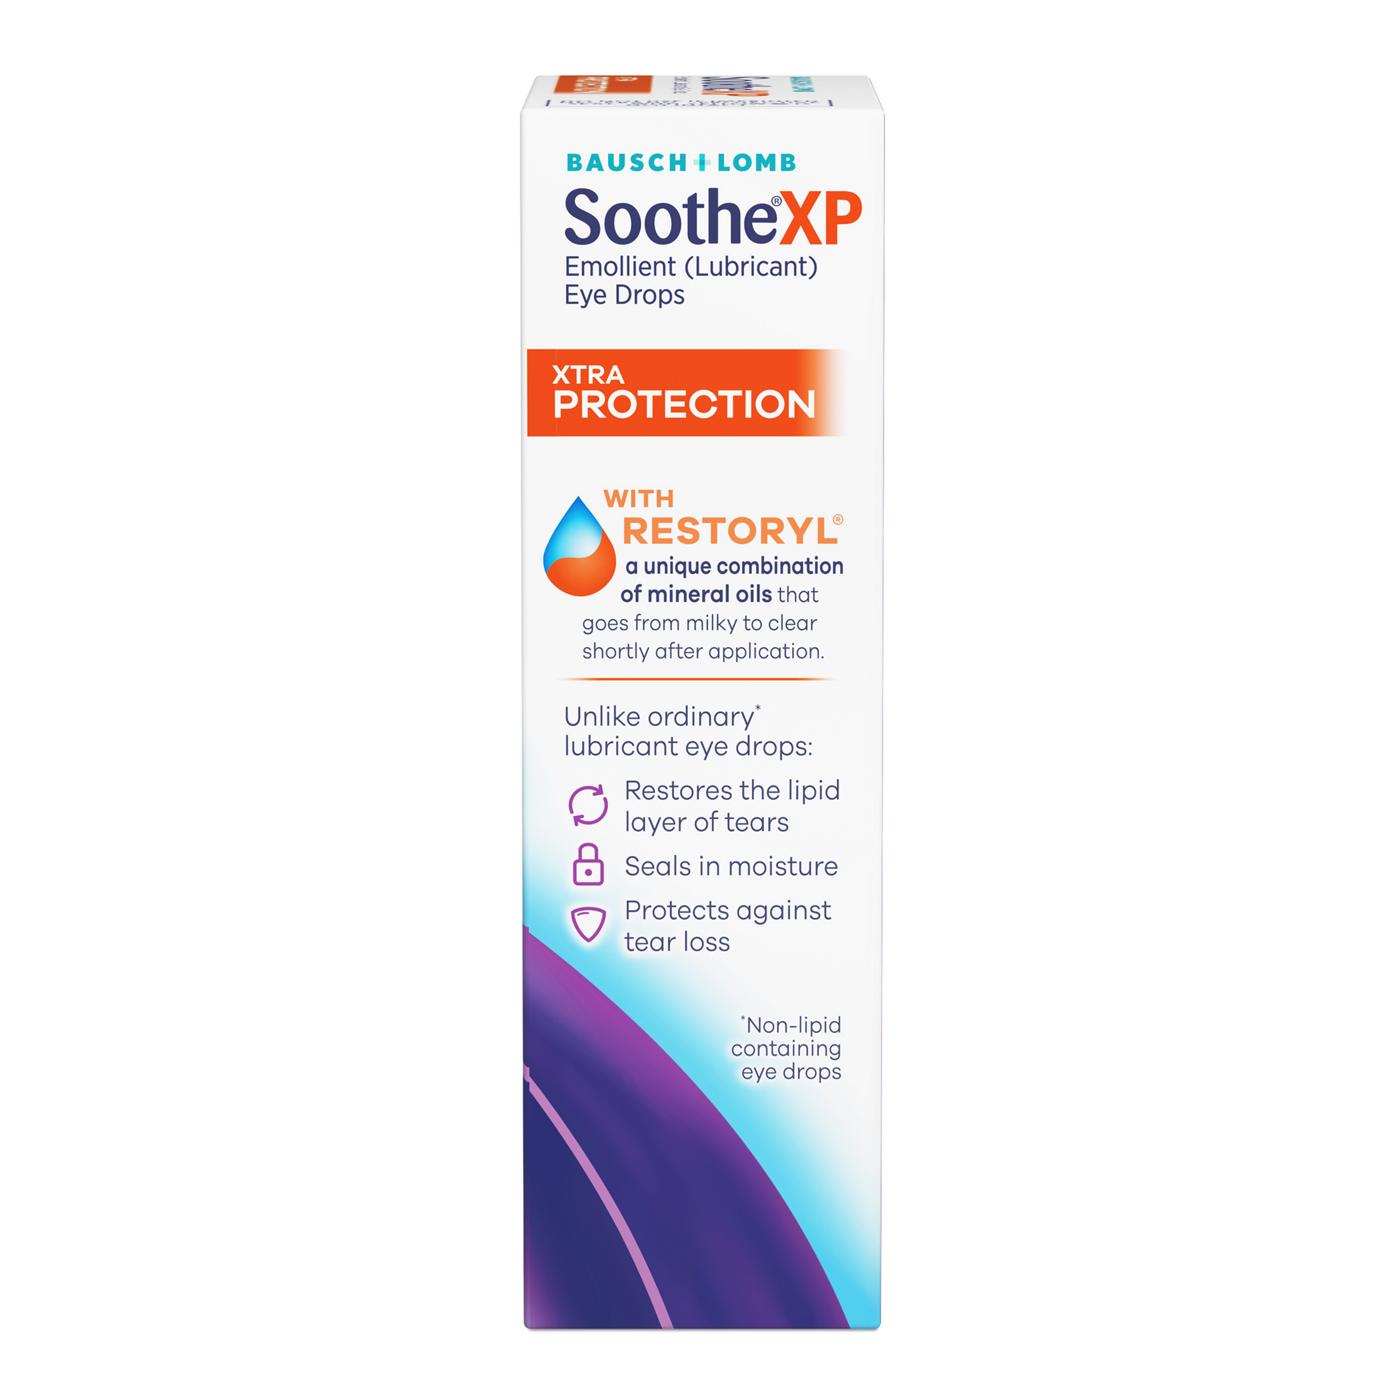 Bausch & Lomb Soothe XP Emollient Lubricant Eye Drops; image 3 of 4